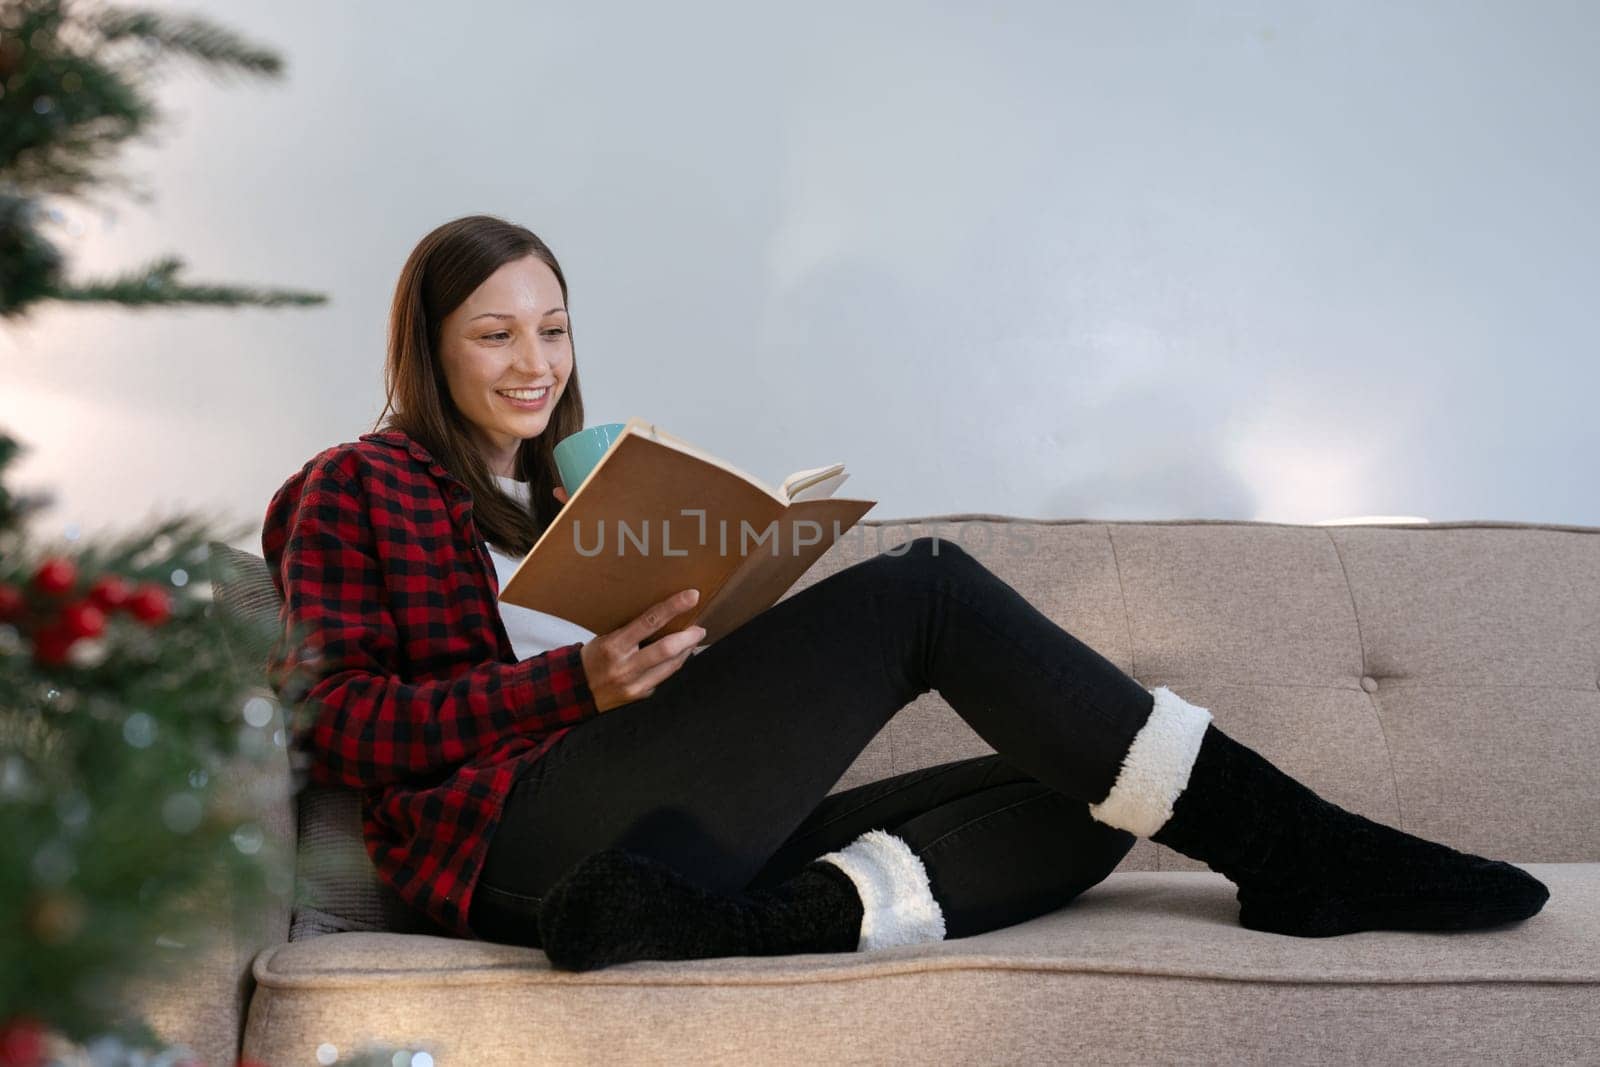 Caucasian woman reading book and relaxation on couch on Christmas holiday by itchaznong